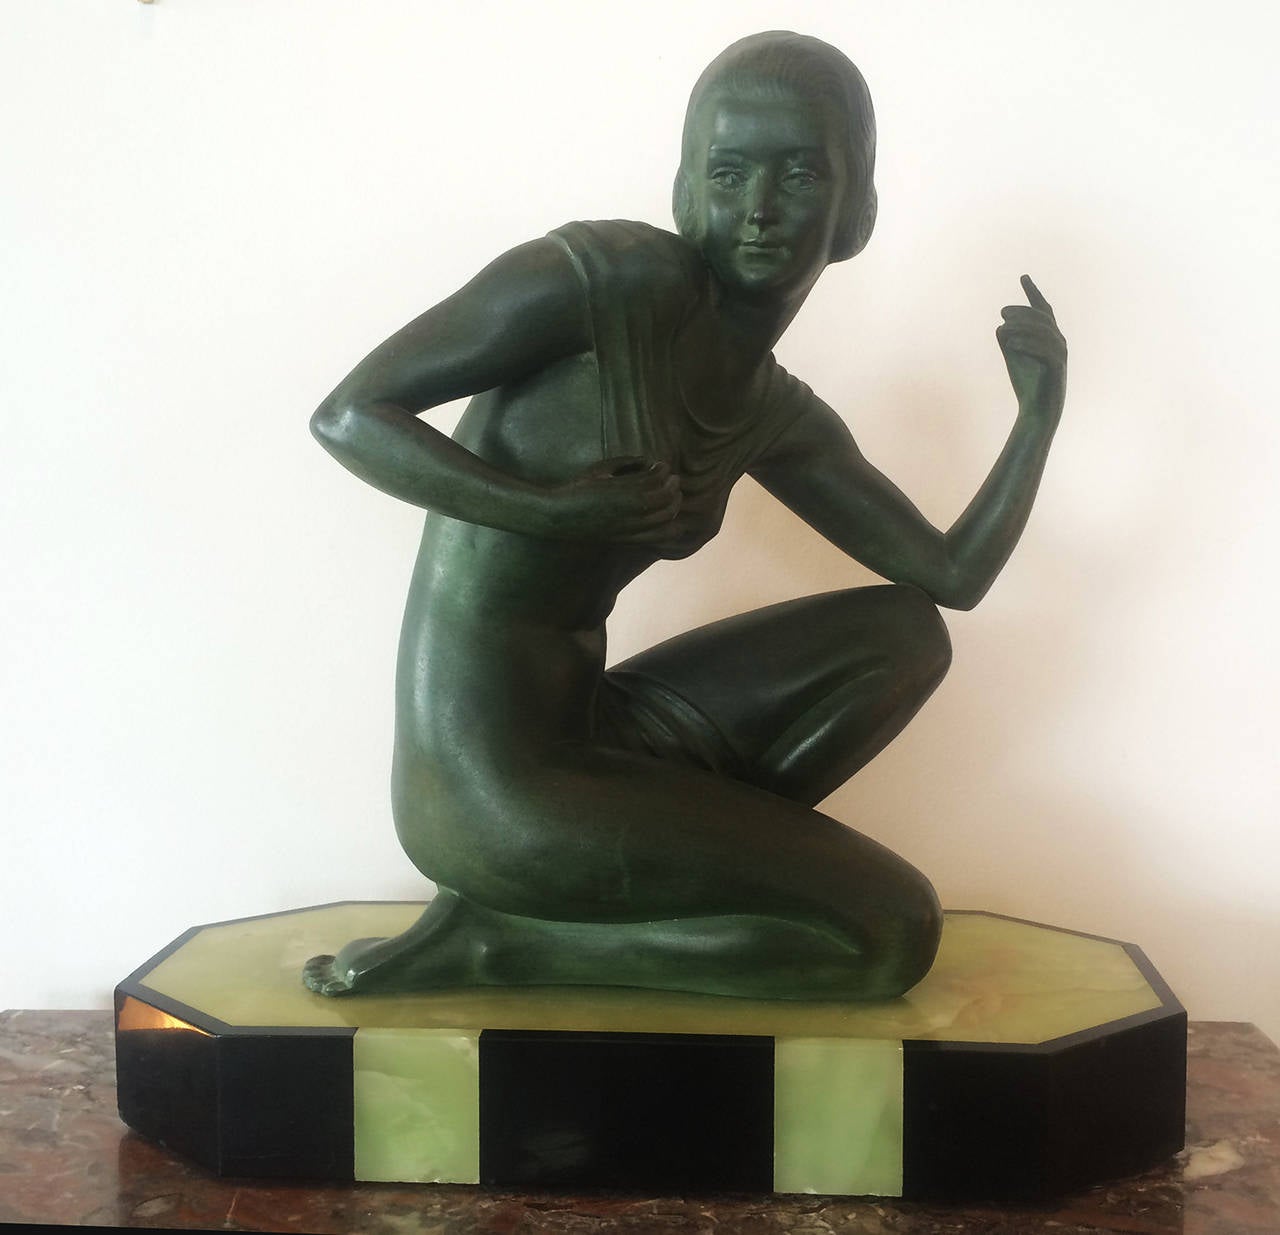 Art Deco bronze sculpture cast as a kneeling nude draped in a veil, on a green and onyx base, signed Scolisse. Sculptor was represented in the 1937 Colonial French exposition.